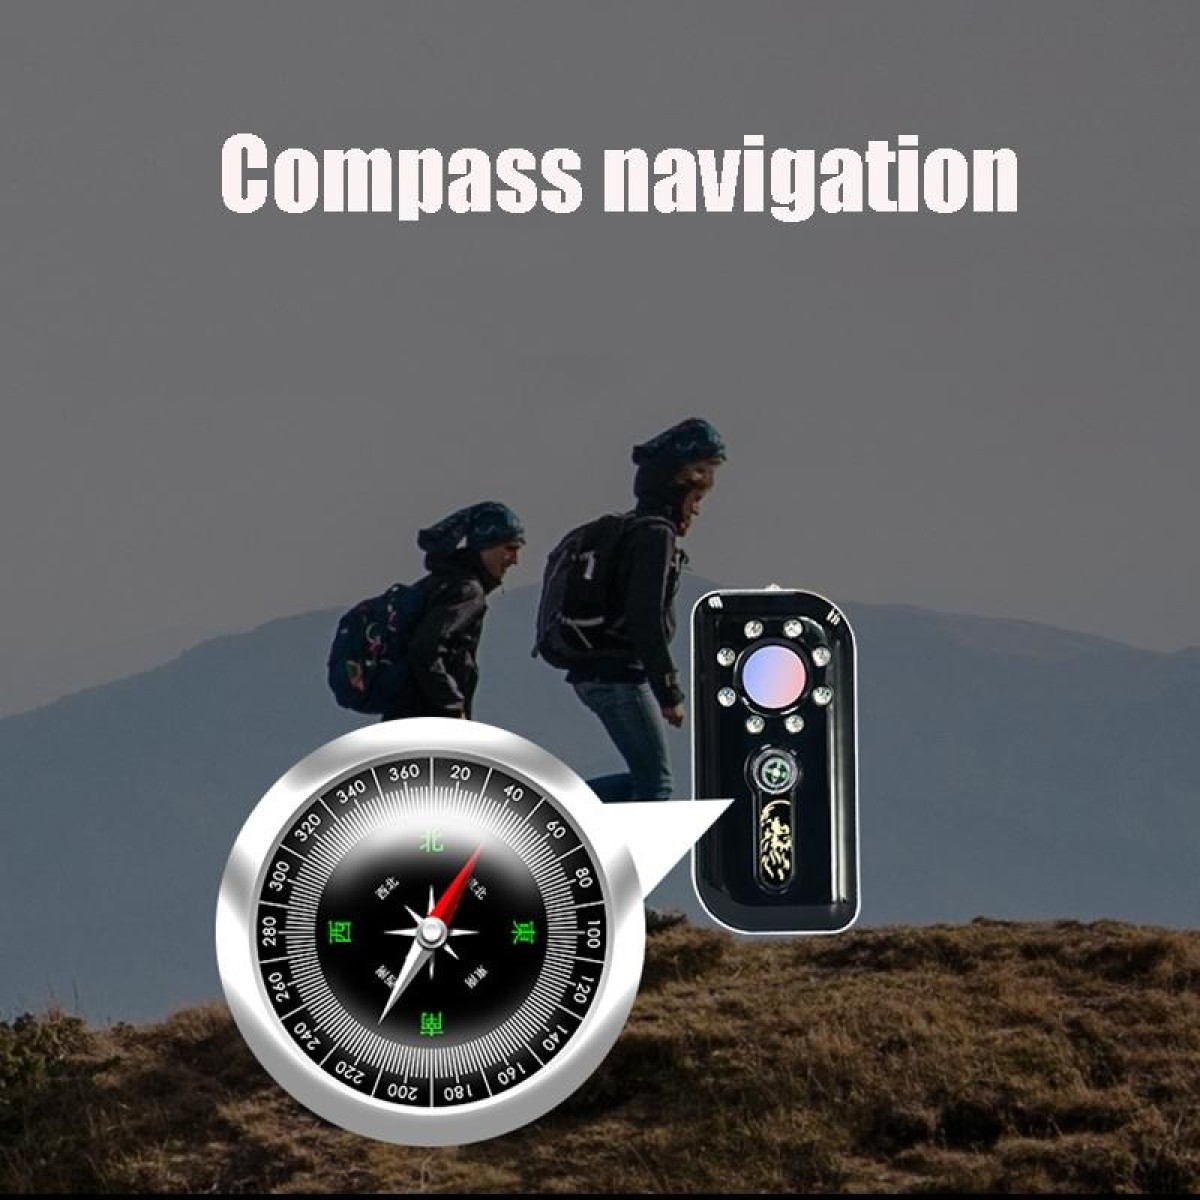 K300 Multifunctional Infrared Detector Ziguang Banknote Detector Hotel Anti-snooping Detection Travel Compass Anti-lost Device(Black)